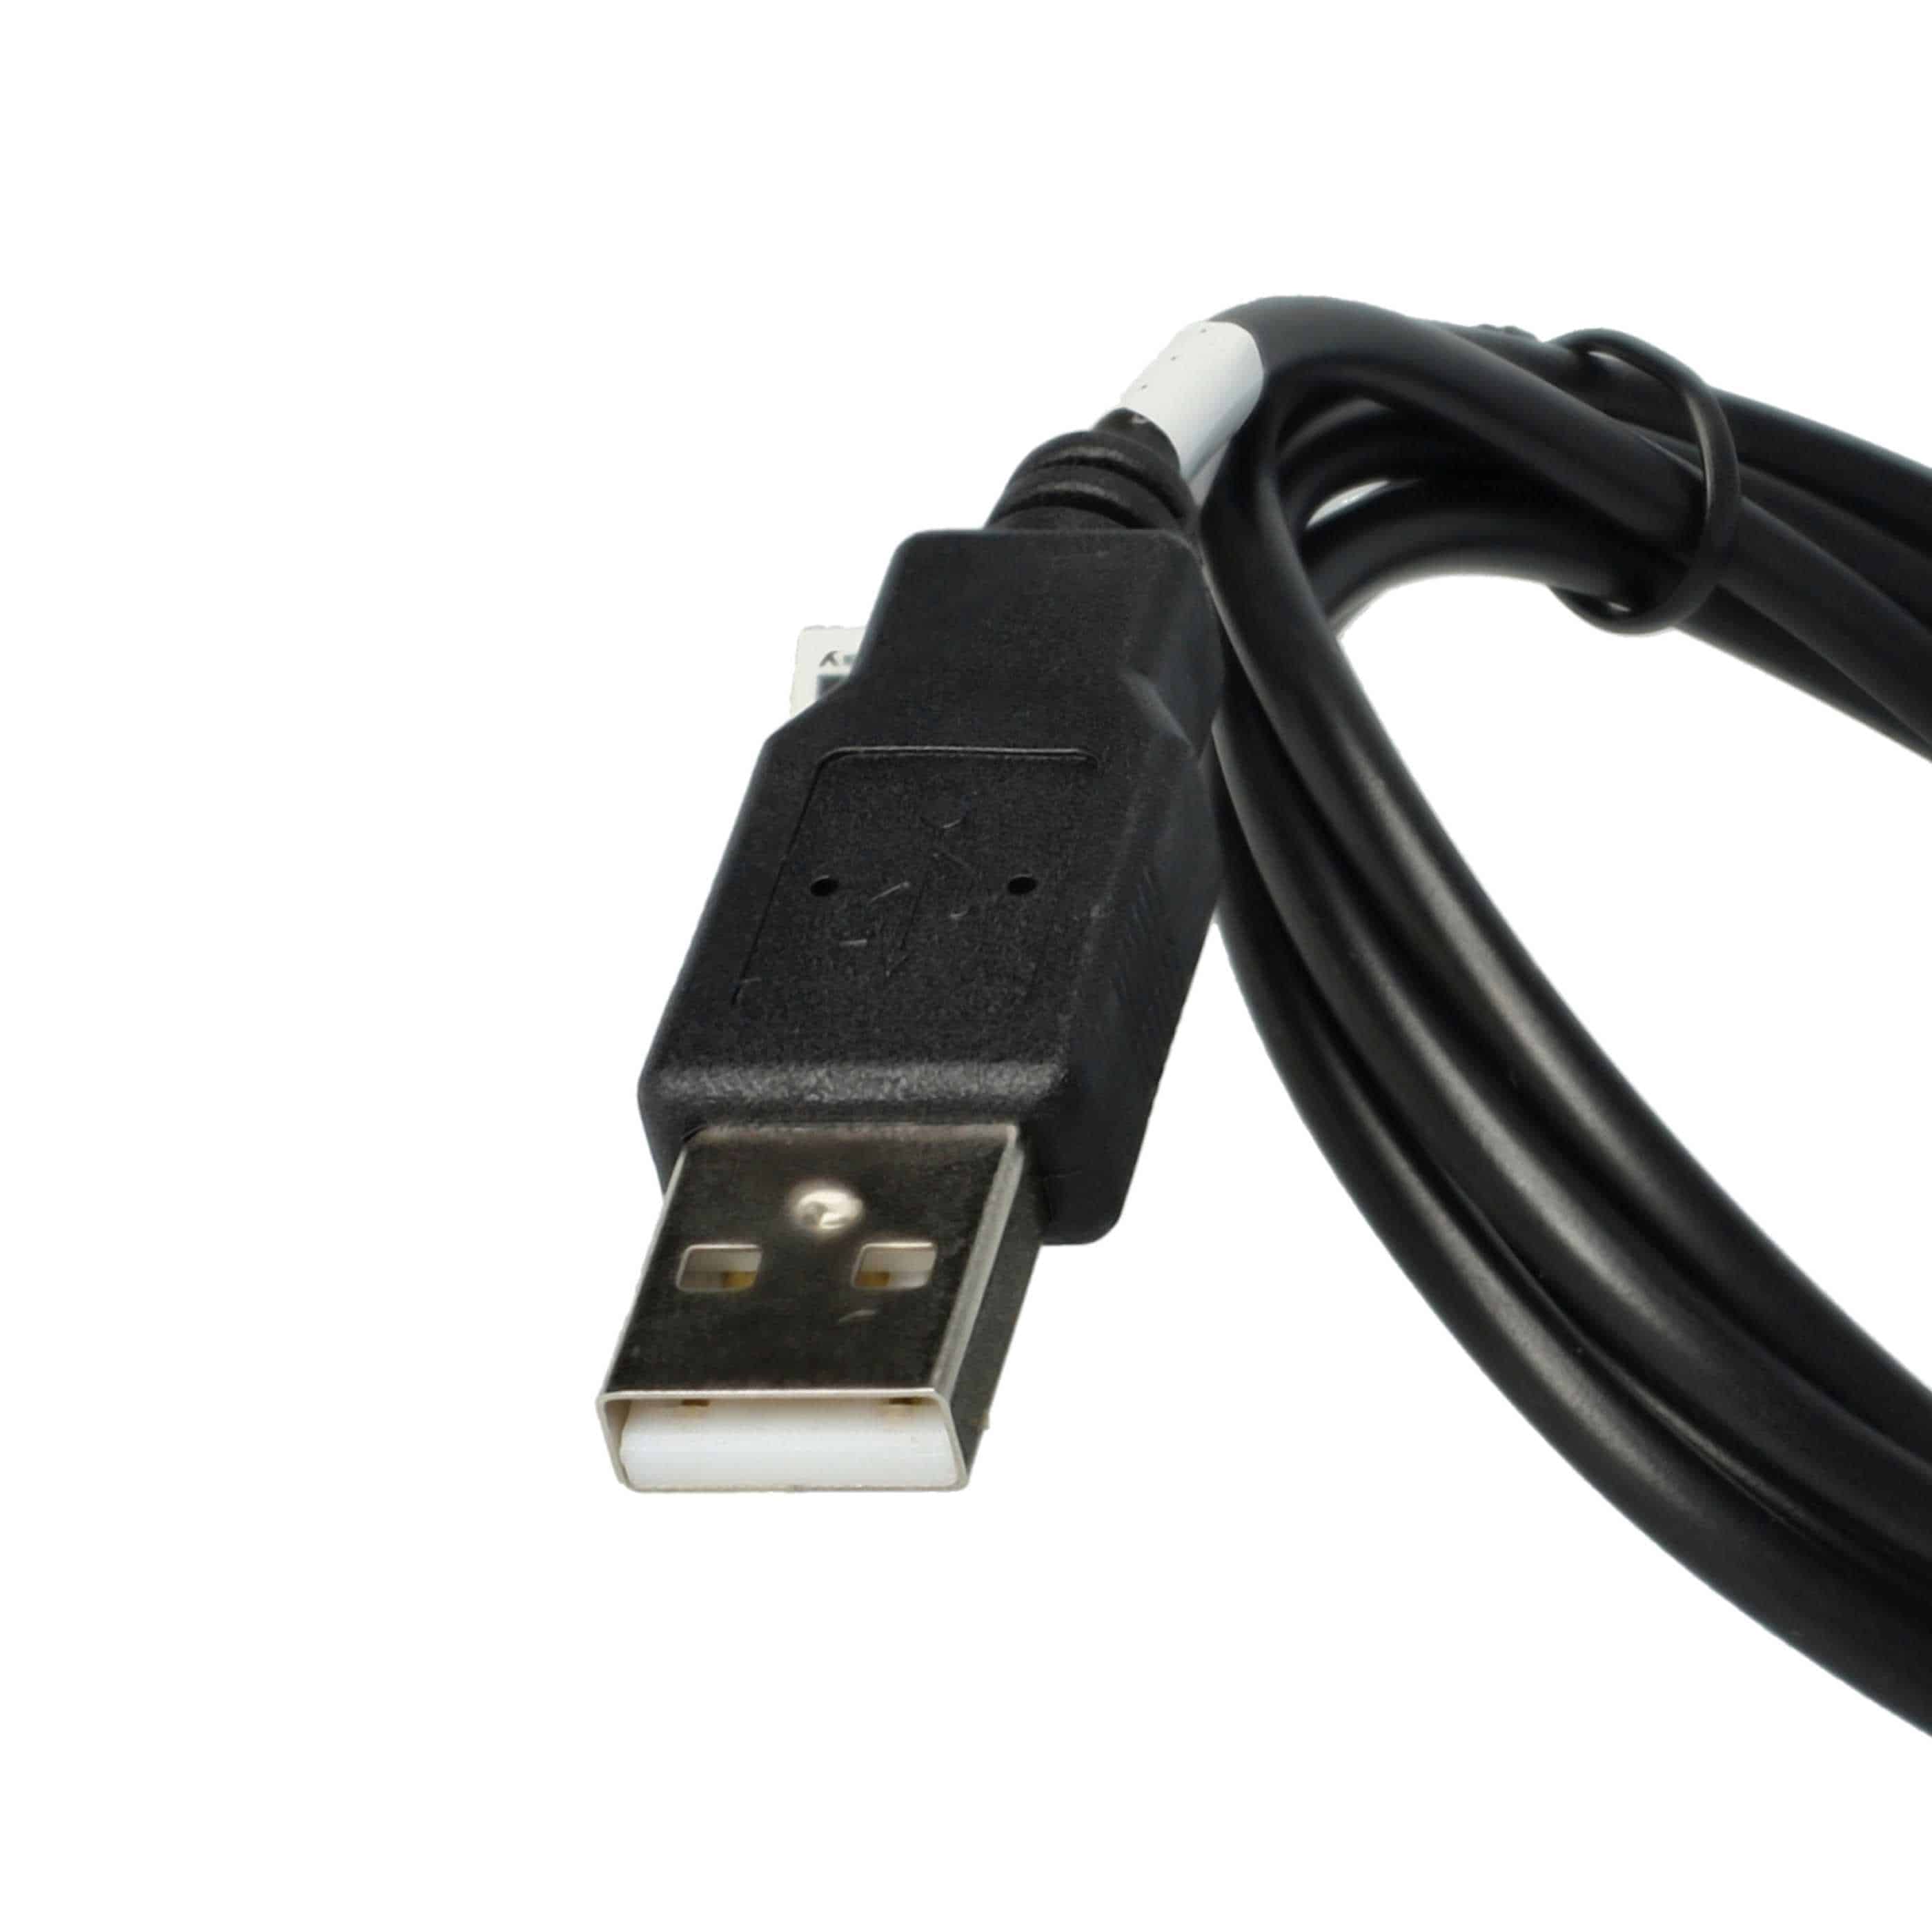 Universal USB Data Cable 2in1 Charger for all Standard GPS Sat-Nav Devices - 100cm Black